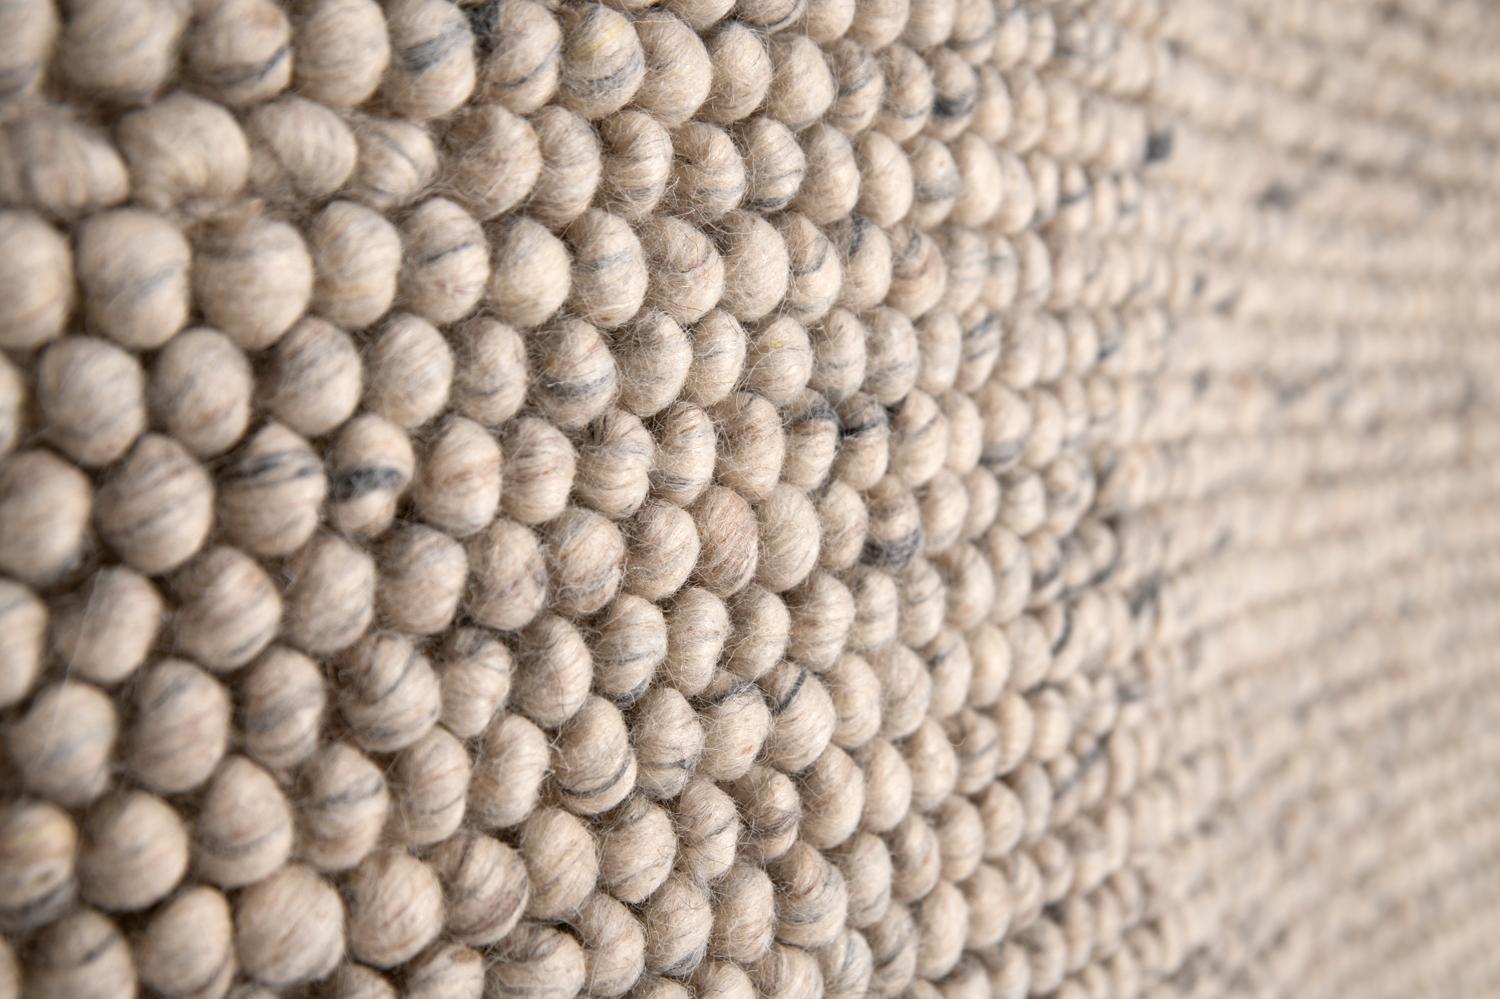 This rug has been ethically hand woven in the finest wool yarns by artisans in north of India, using a traditional weaving technique which defines the design making small bubbles.
Each rug is handwoven with irregular details to create beautiful